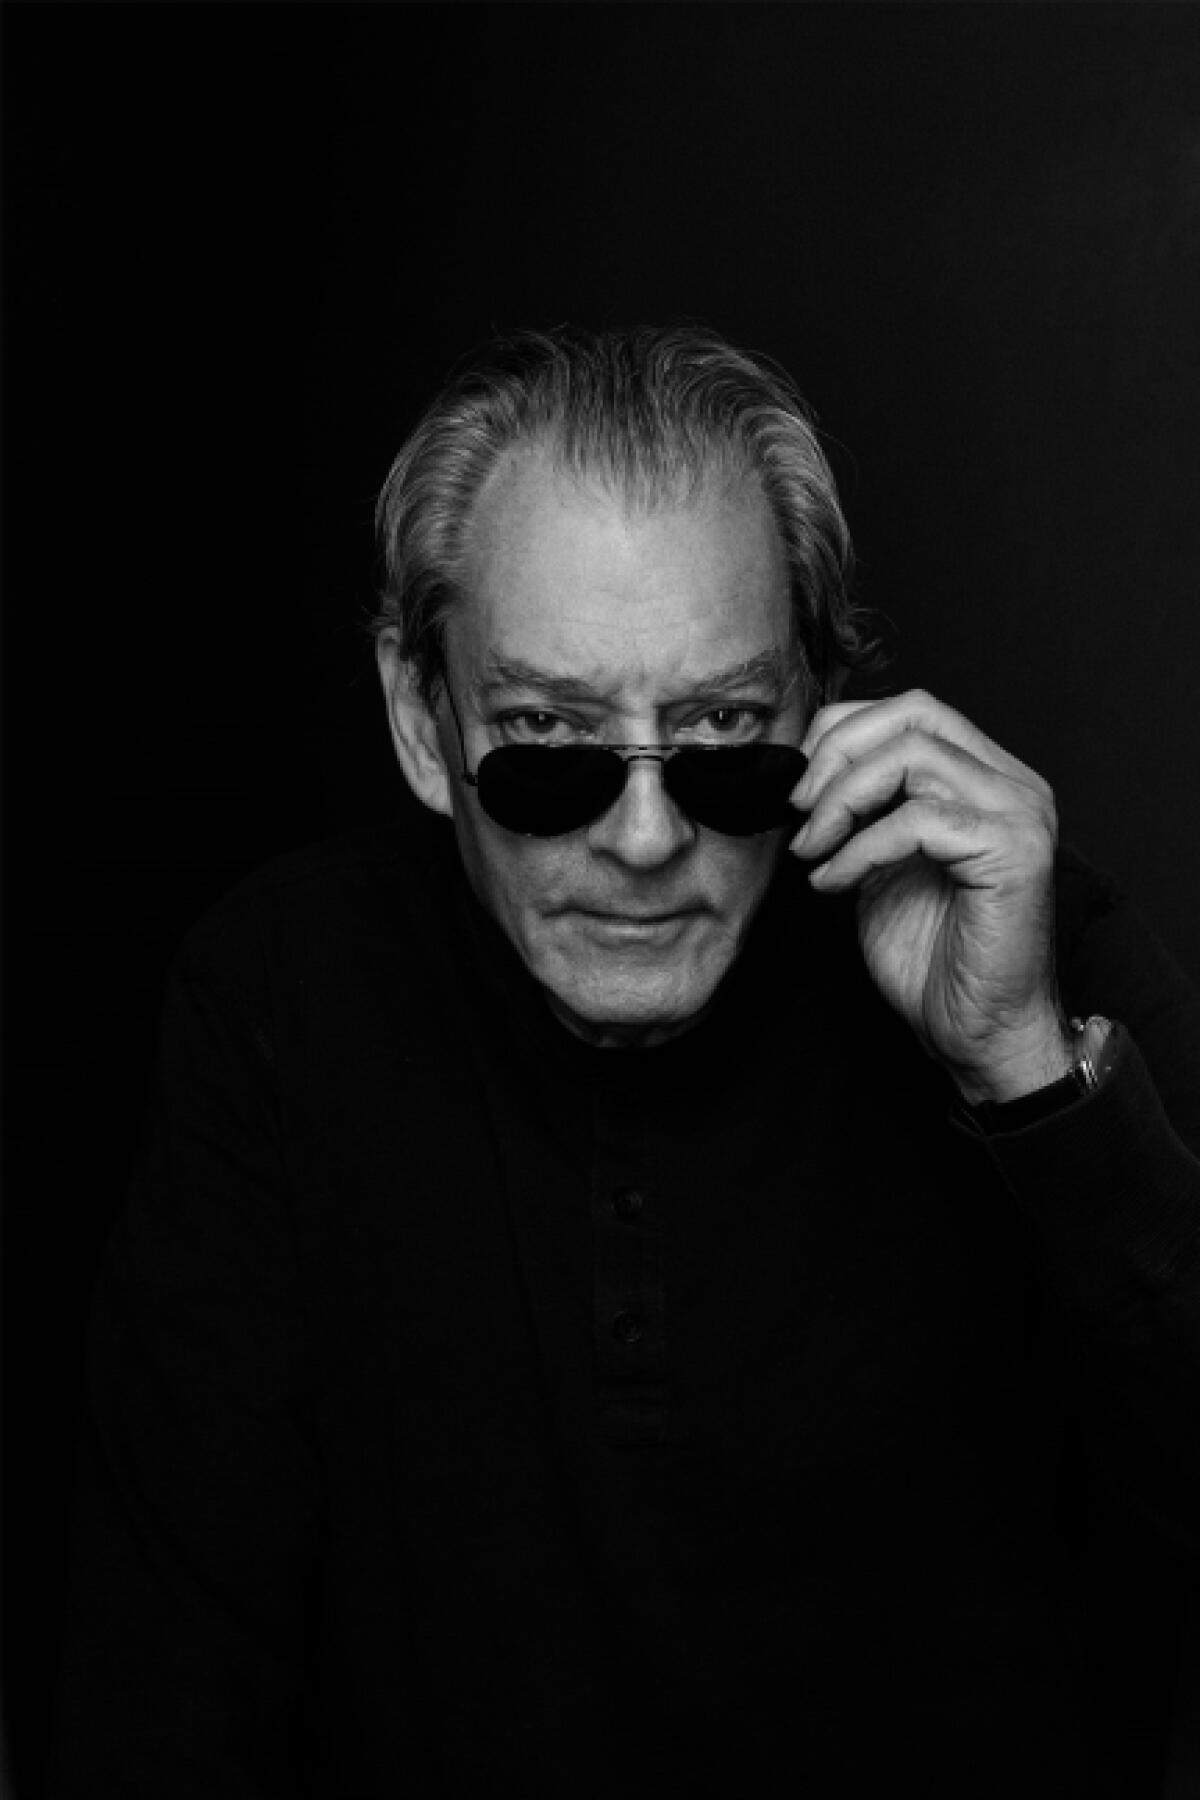 Paul Auster tilts his dark sunglasses down to show his eyes in a monochromatic portrait